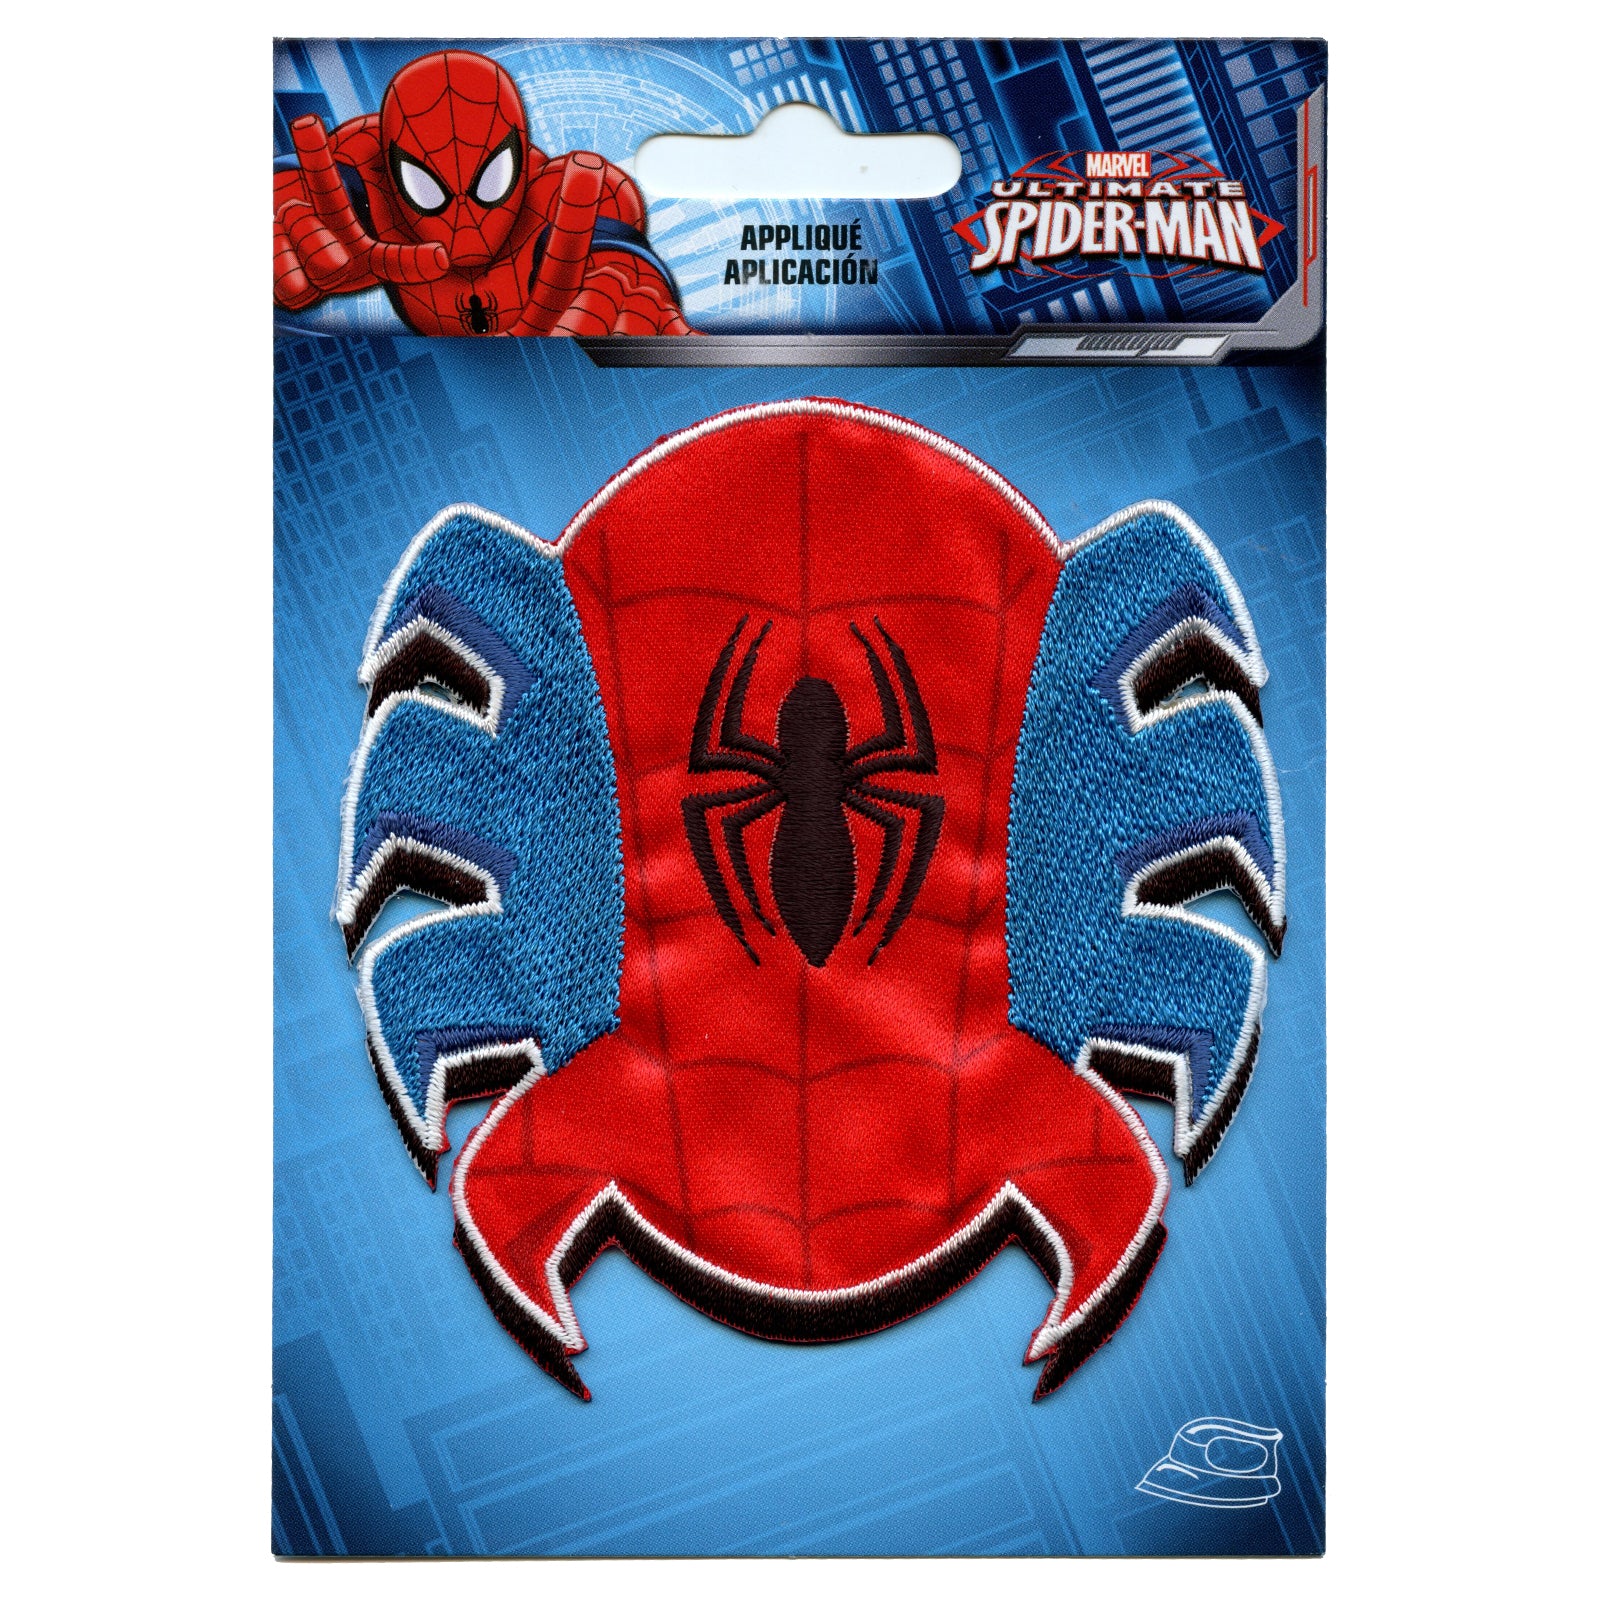 Marvel Classic Spiderman Spider Logo Embroidered Iron On Applique Patch 